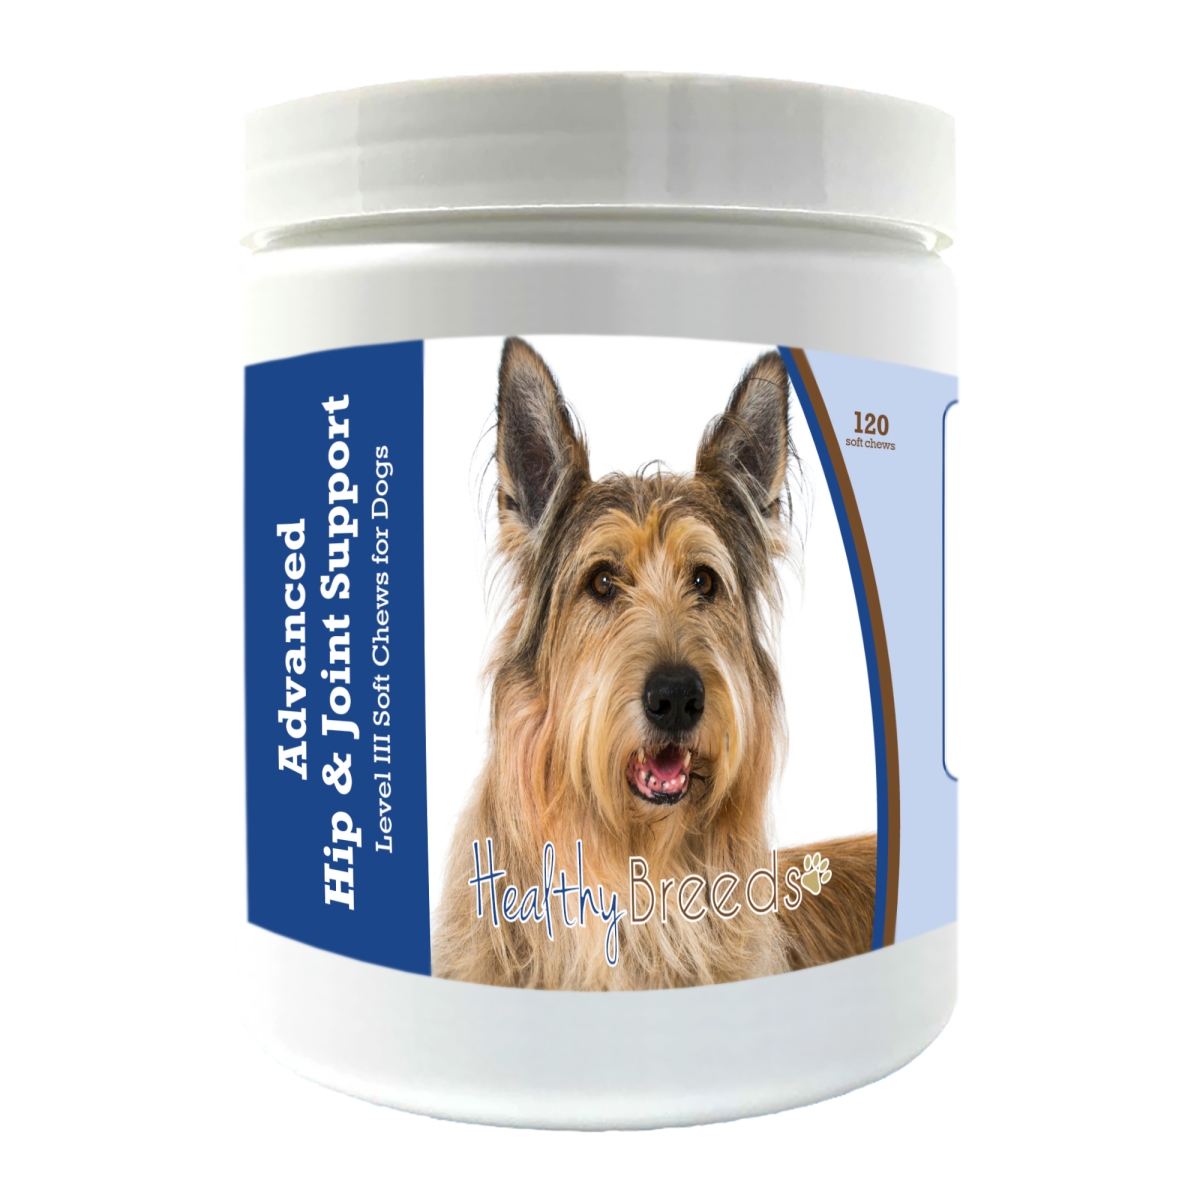 Picture of Healthy Breeds 192959897623 Berger Picard Advanced Hip & Joint Support Level III Soft Chews for Dogs